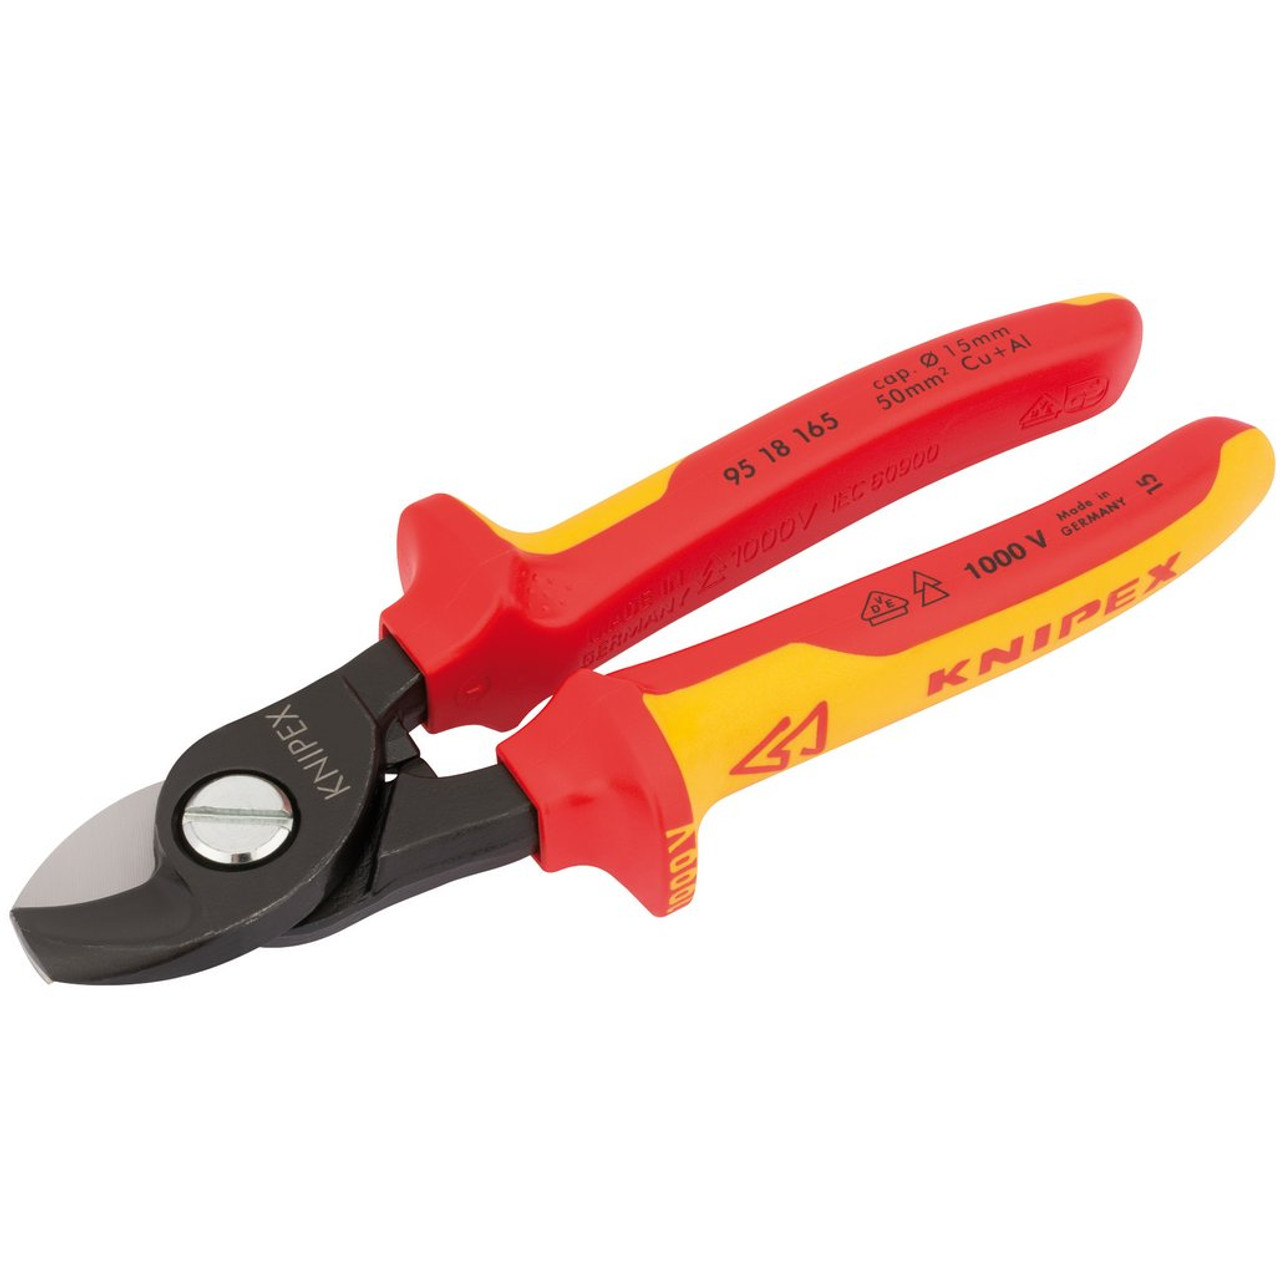 KNIPEX 95 41 165 - 3138 Cable Shears burnished, handles plastic coated,  with stripping function